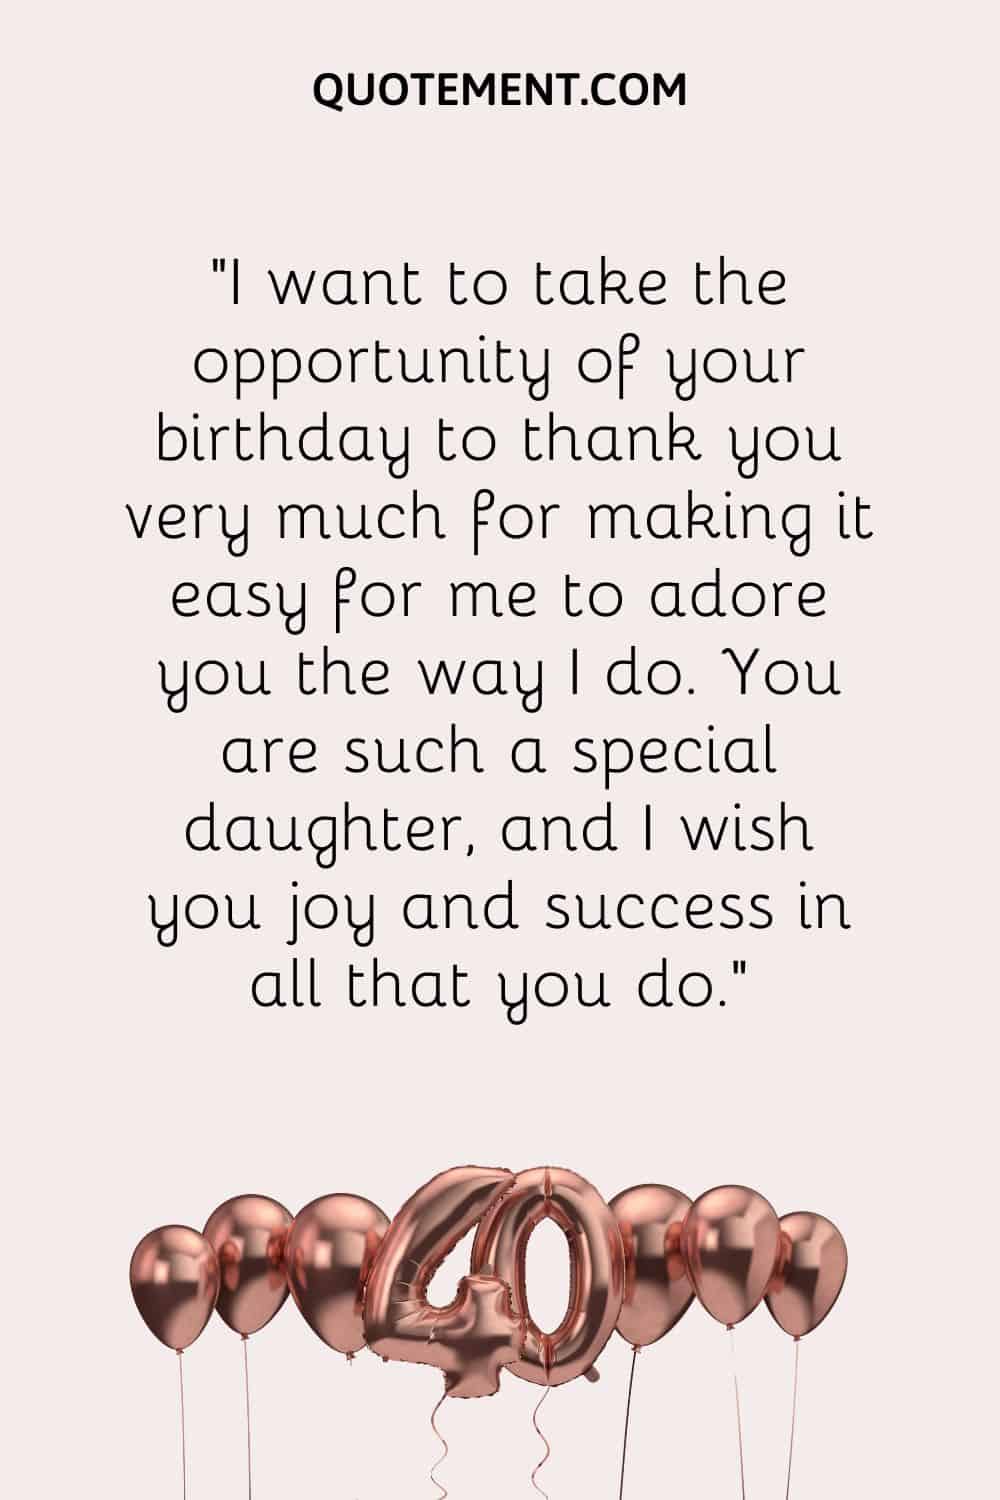 I want to take the opportunity of your birthday to thank you very much for making it easy for me to adore you the way I do